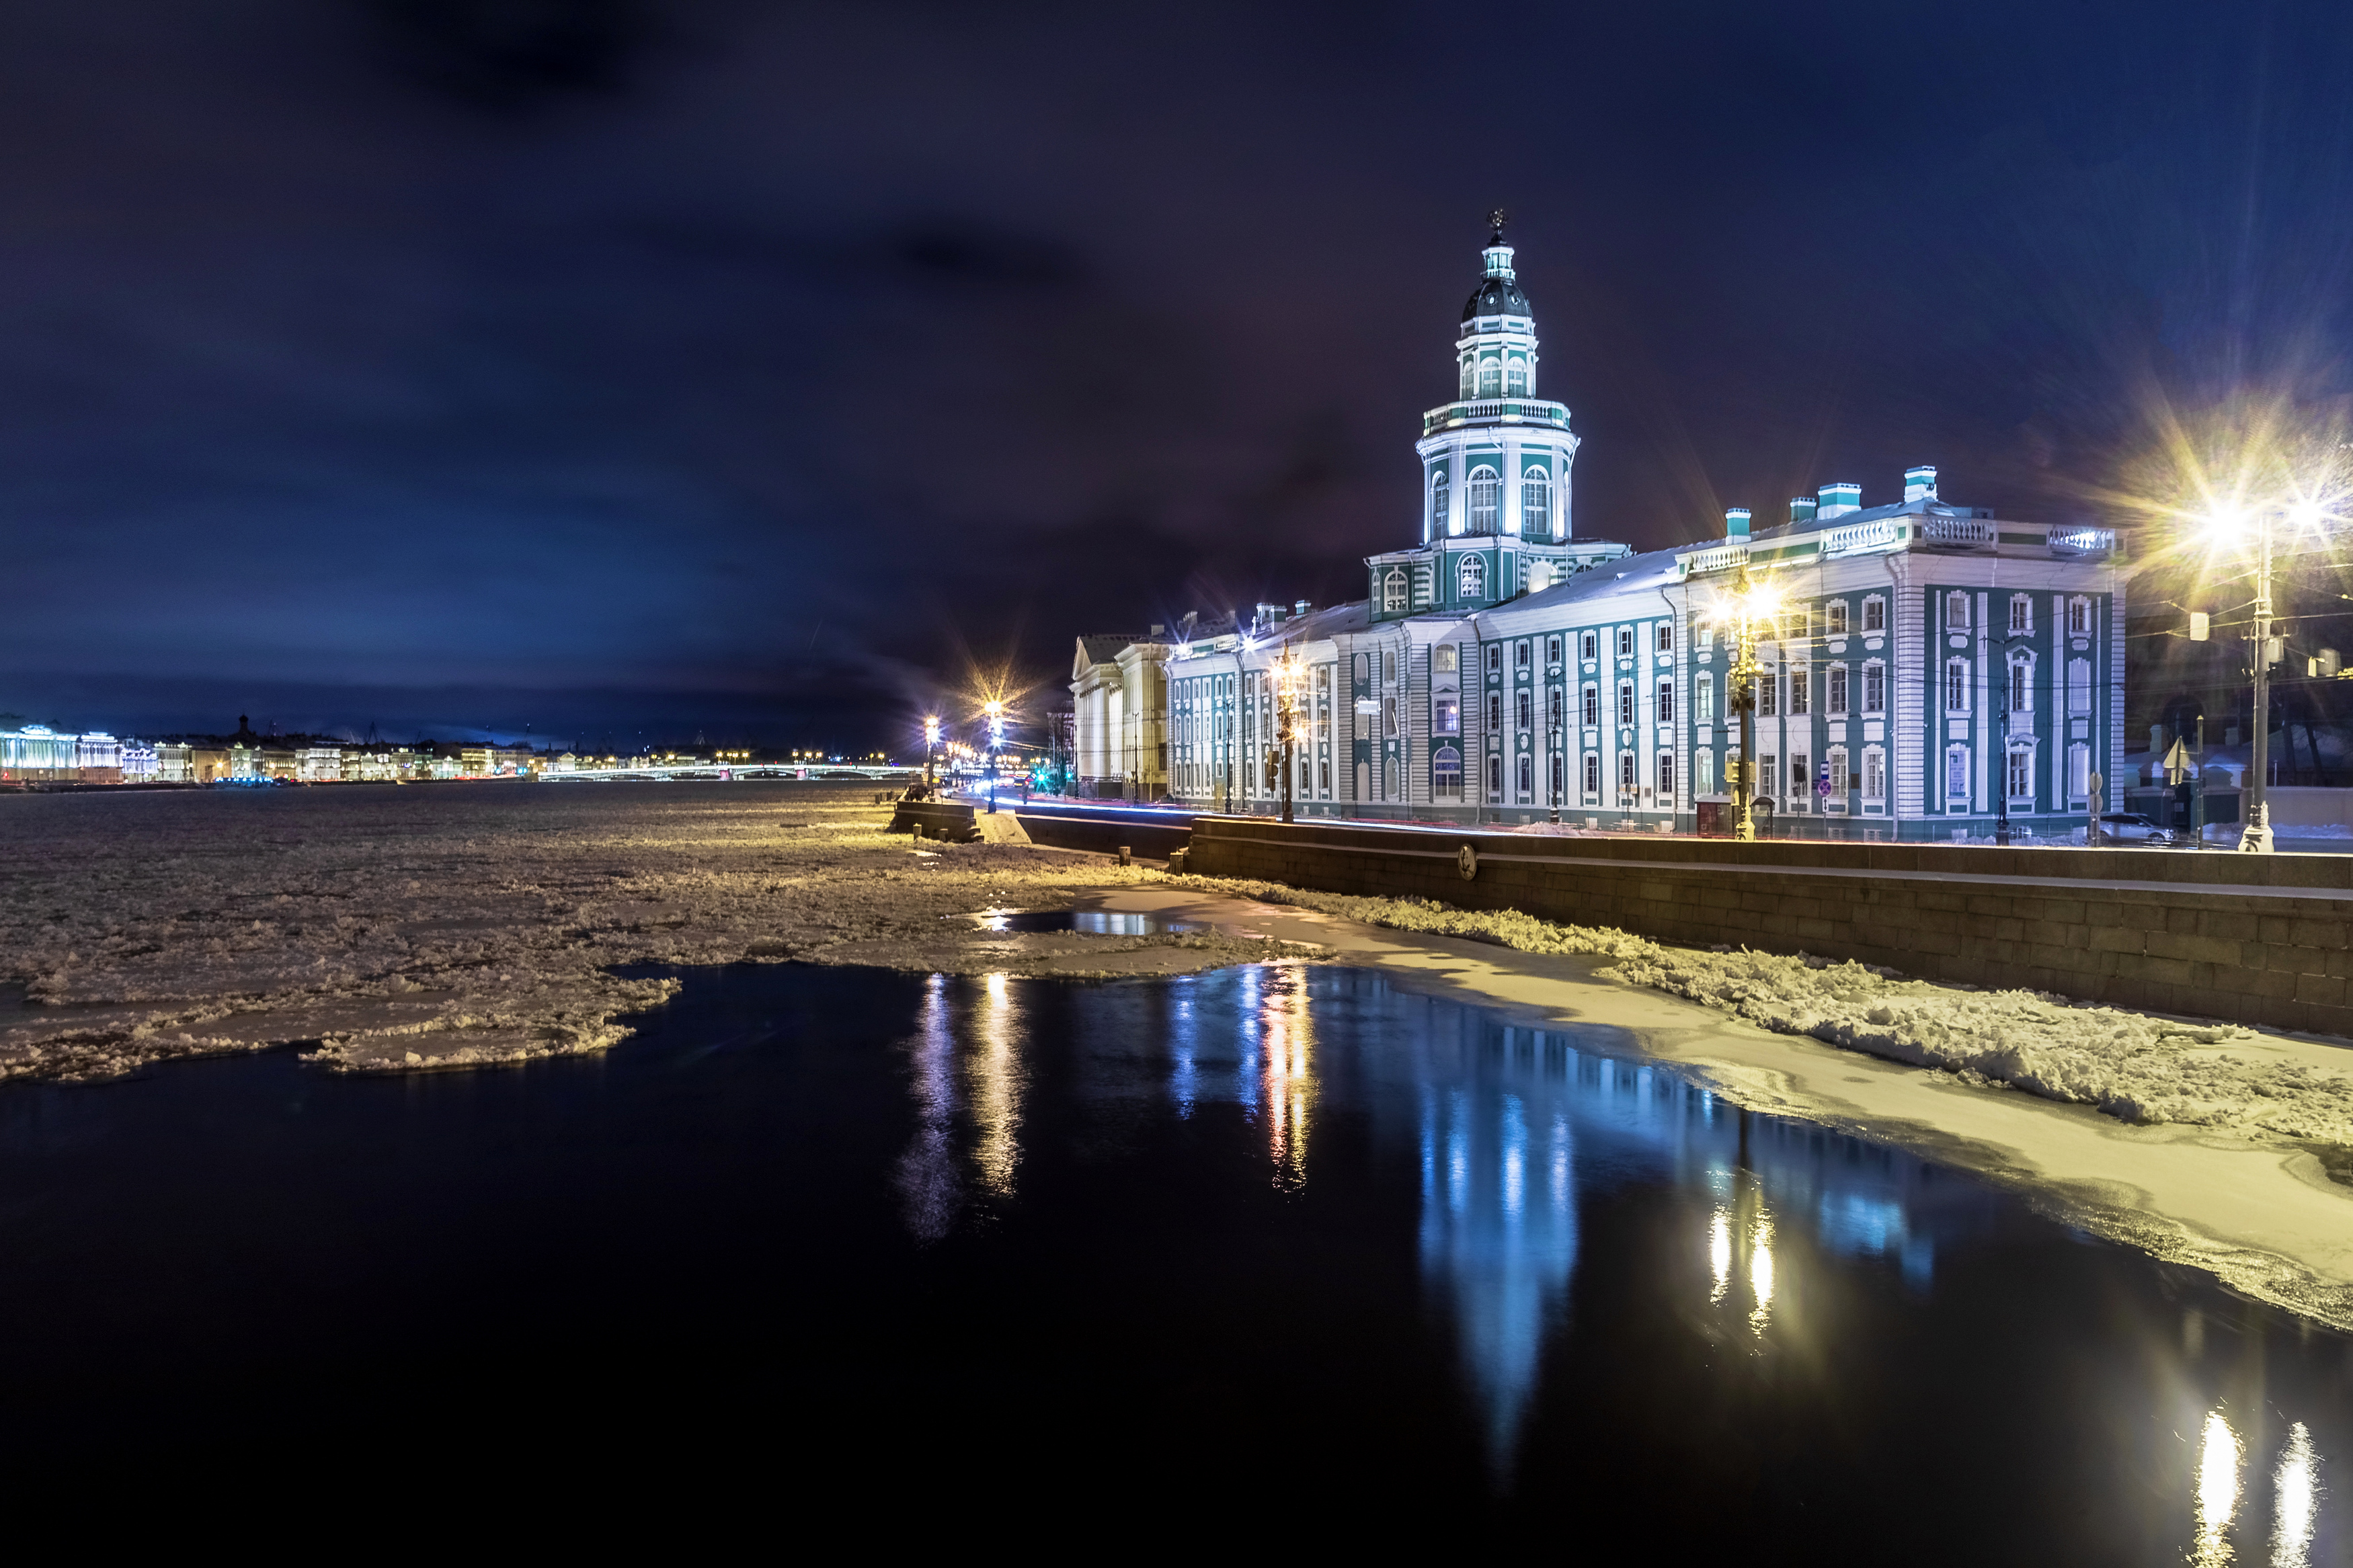 Architecture Building Old Building Museum St Petersburg Russia Night Lights River Reflection Citysca 3500x2333